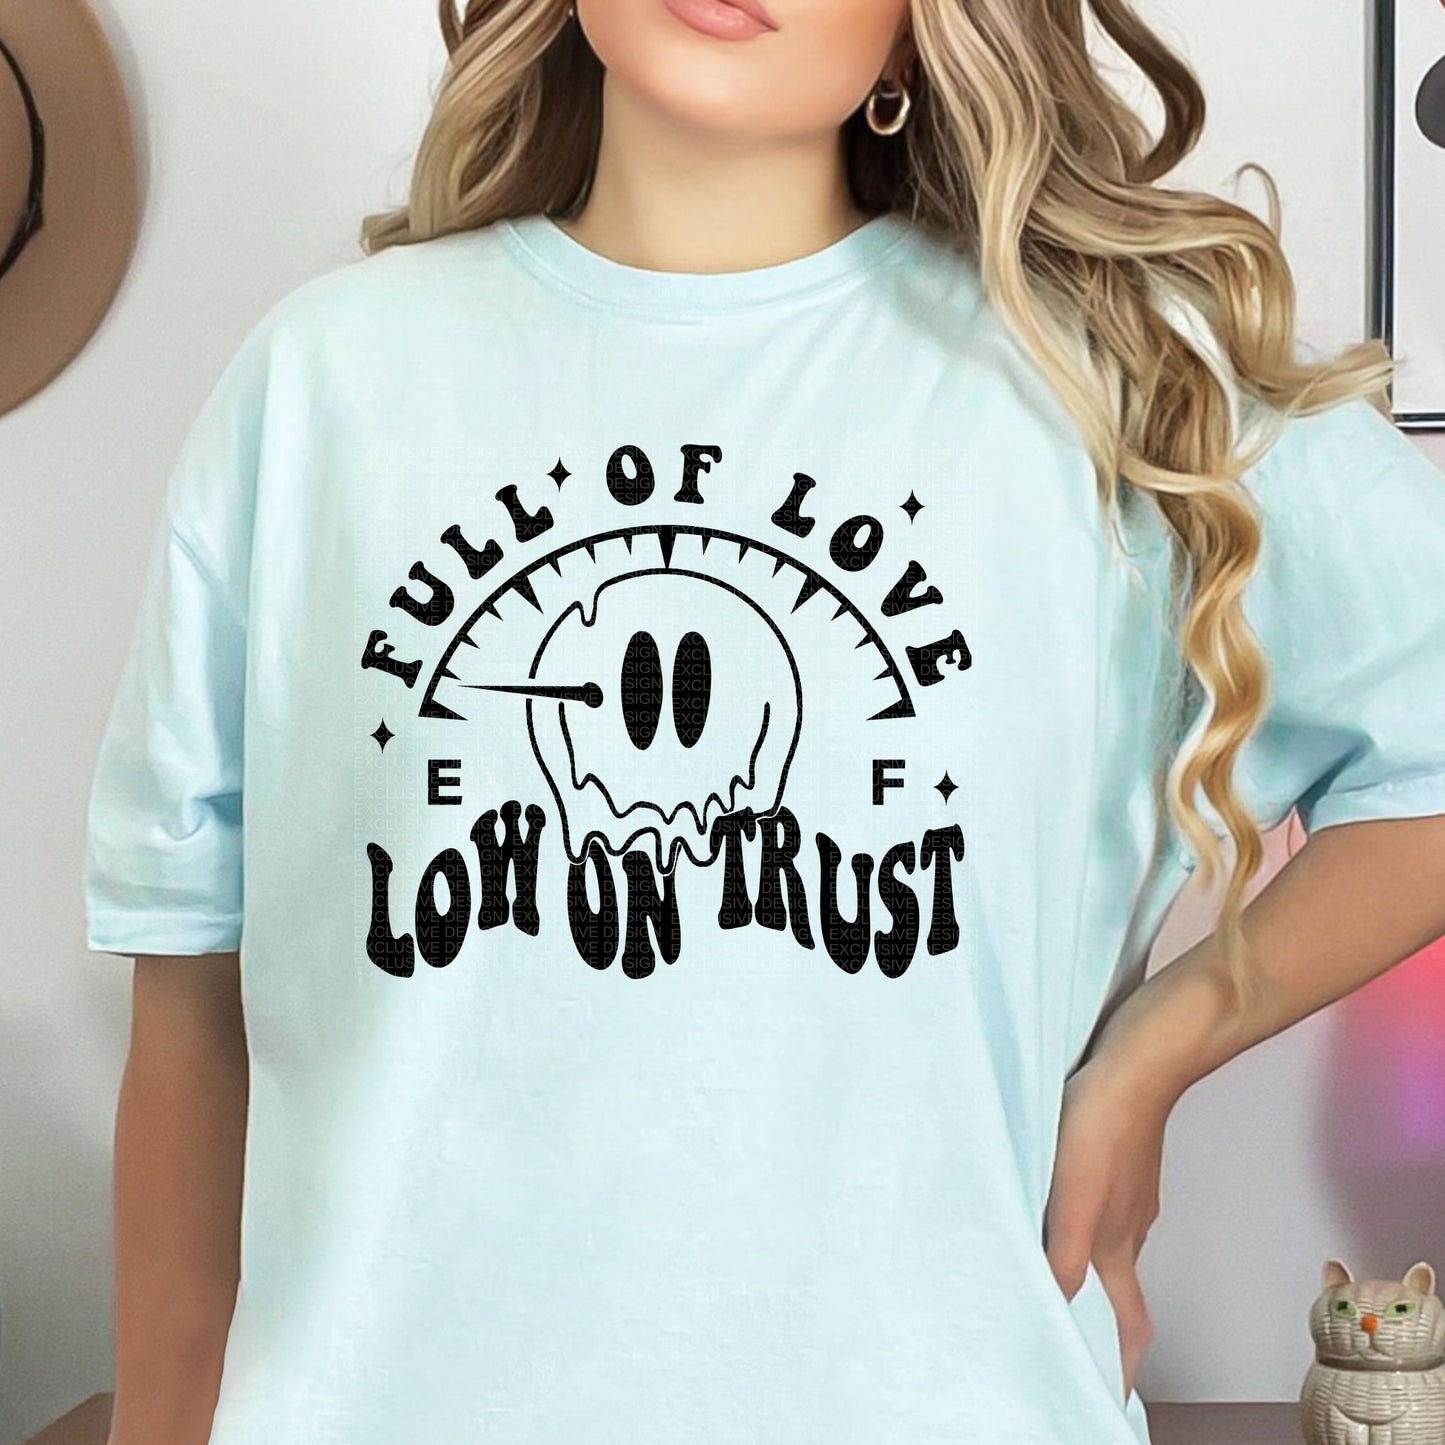 Full of love low on trust *Ollie & Co Exclusive*